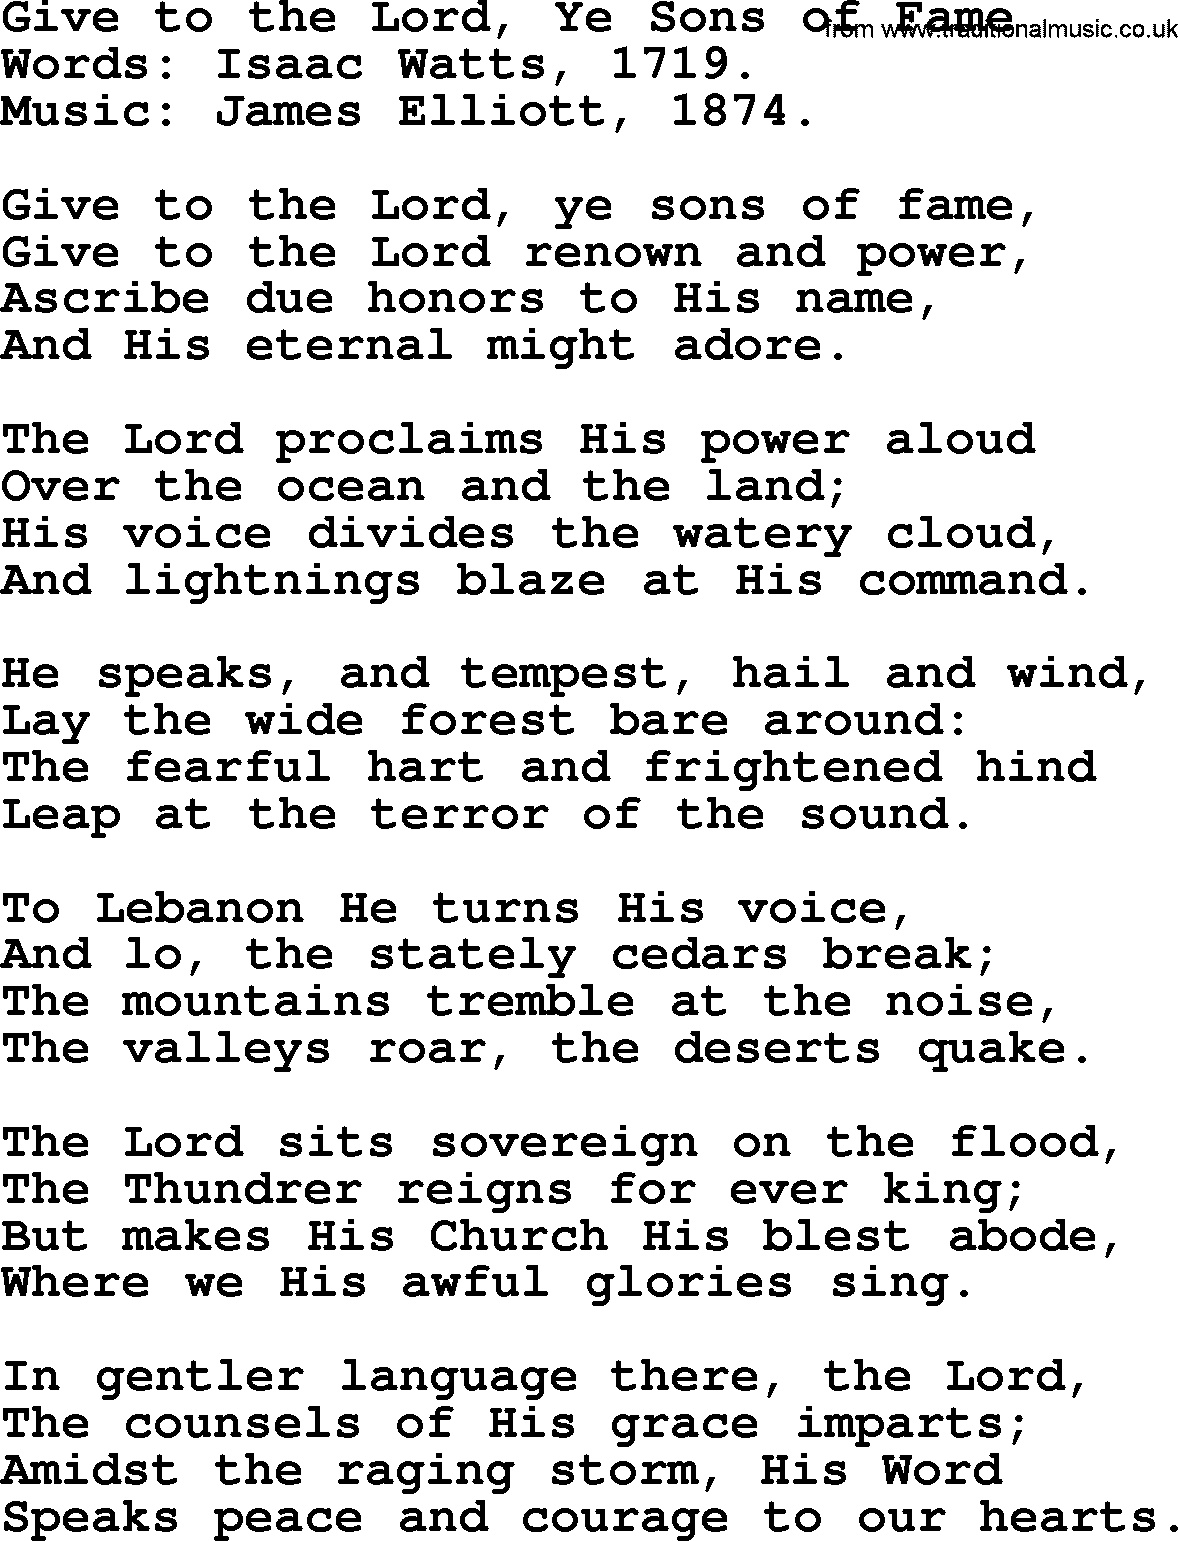 Isaac Watts Christian hymn: Give to the Lord, Ye Sons of Fame- lyricss